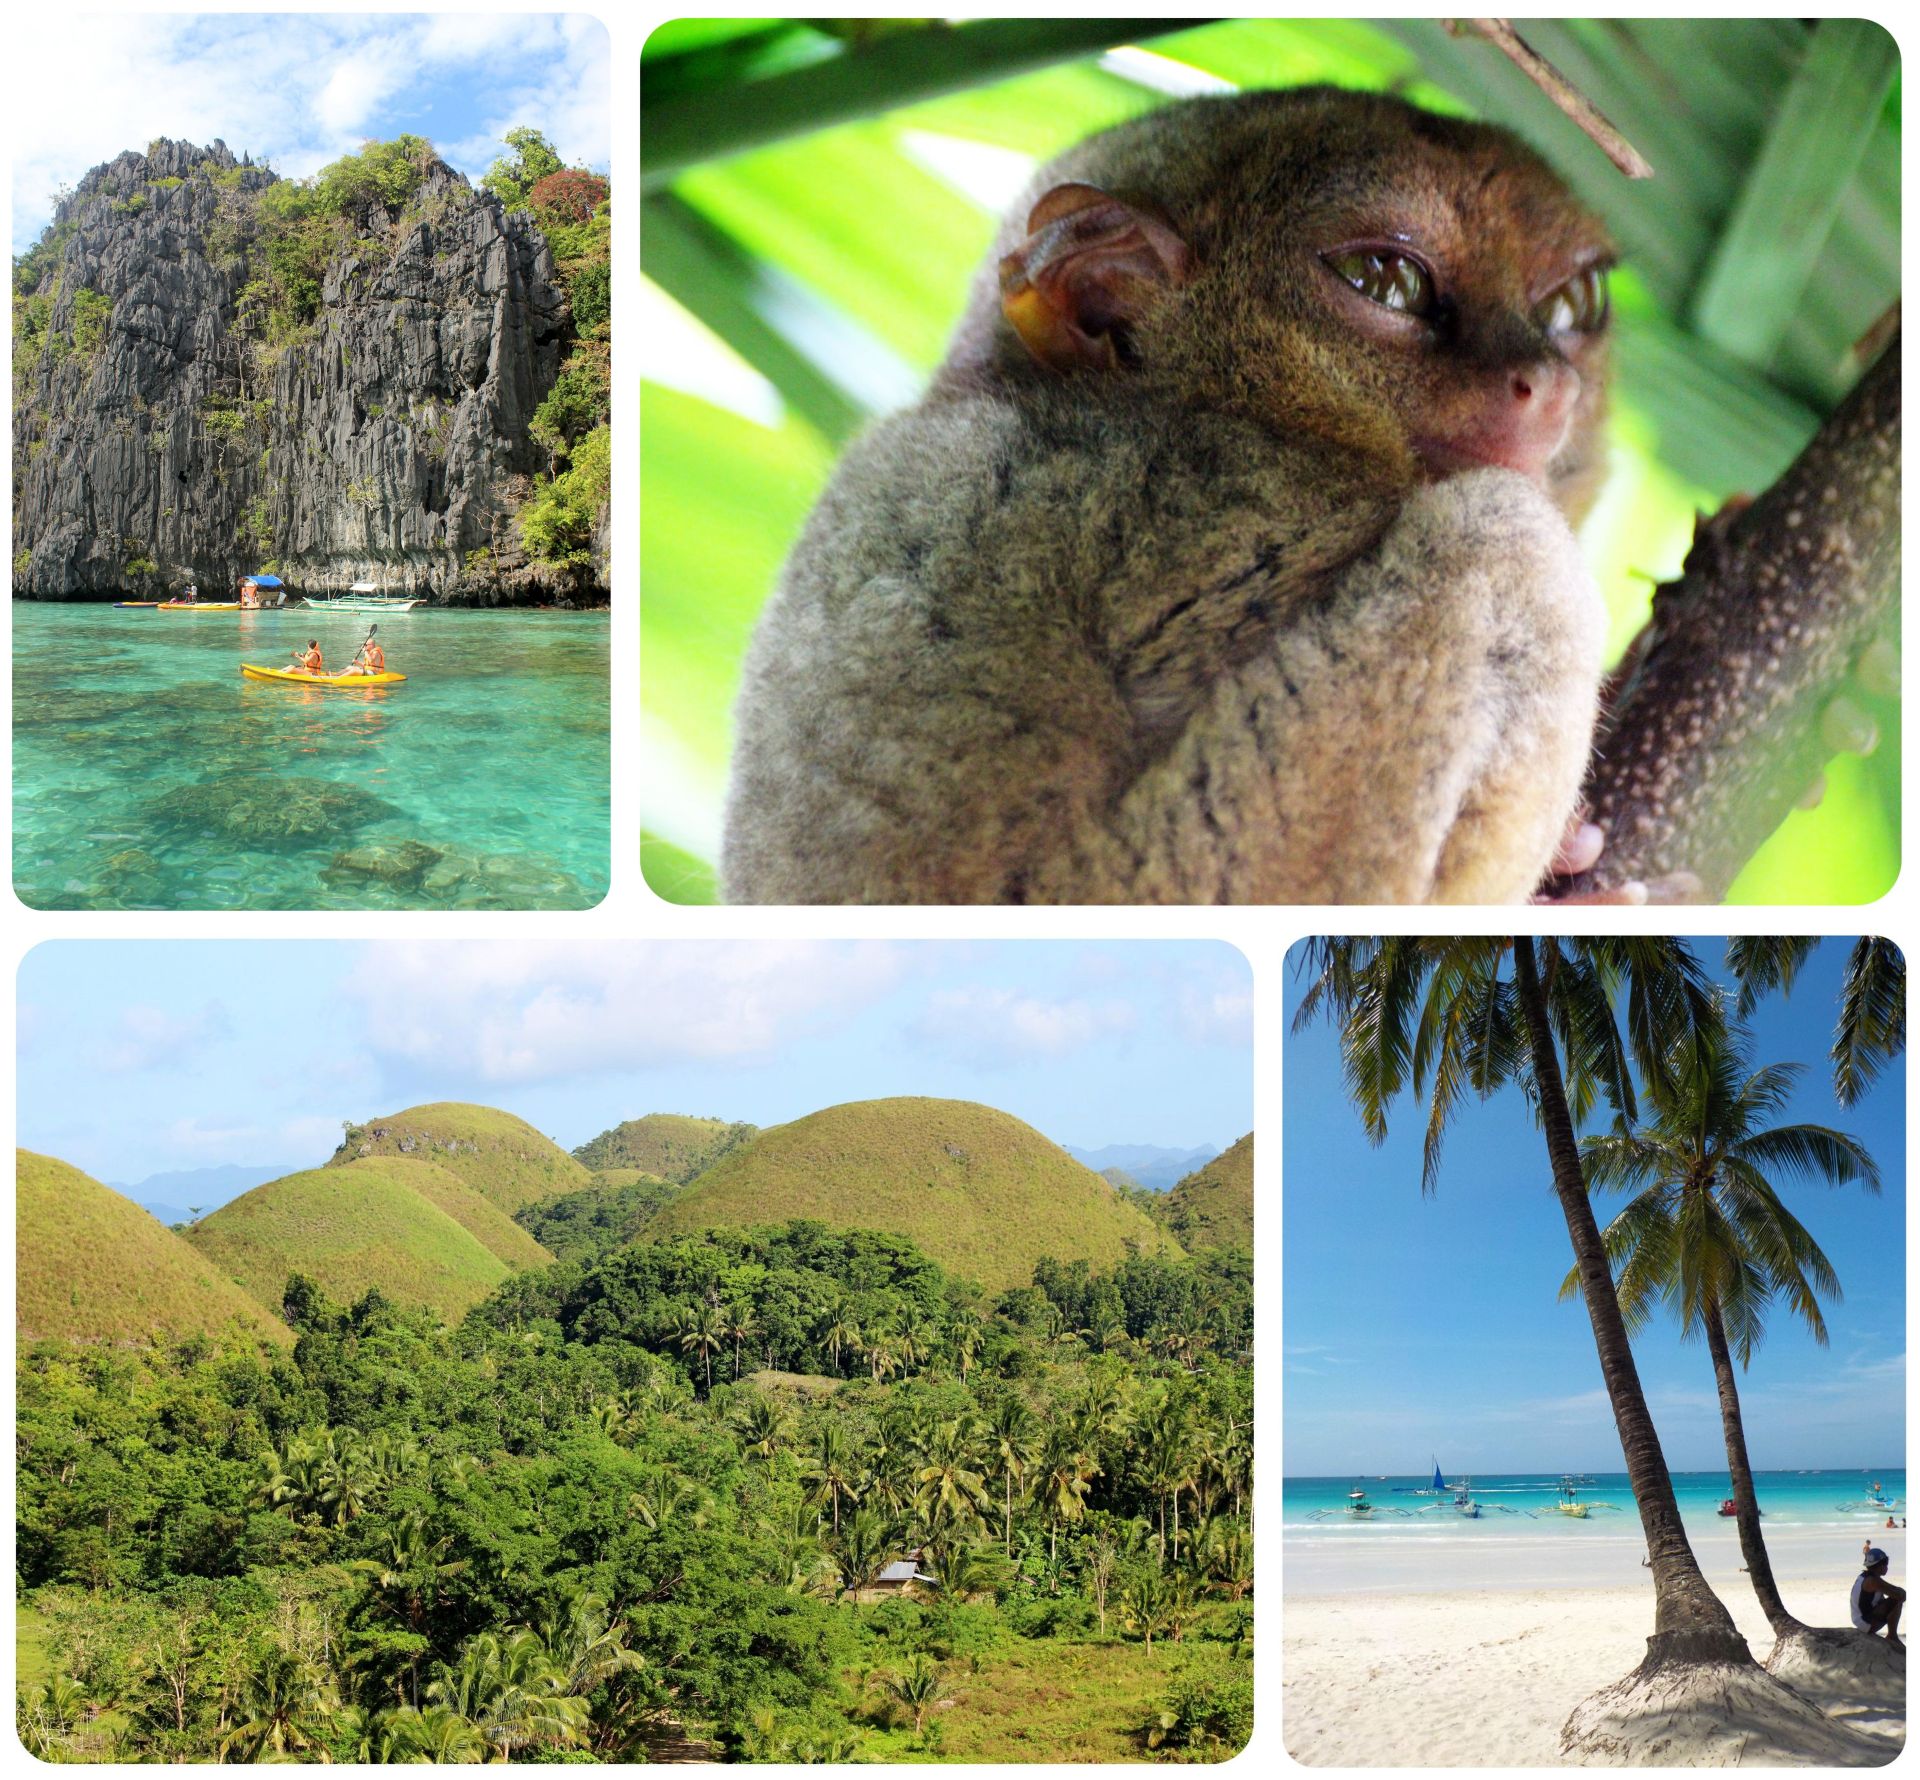 The beautiful Philippines